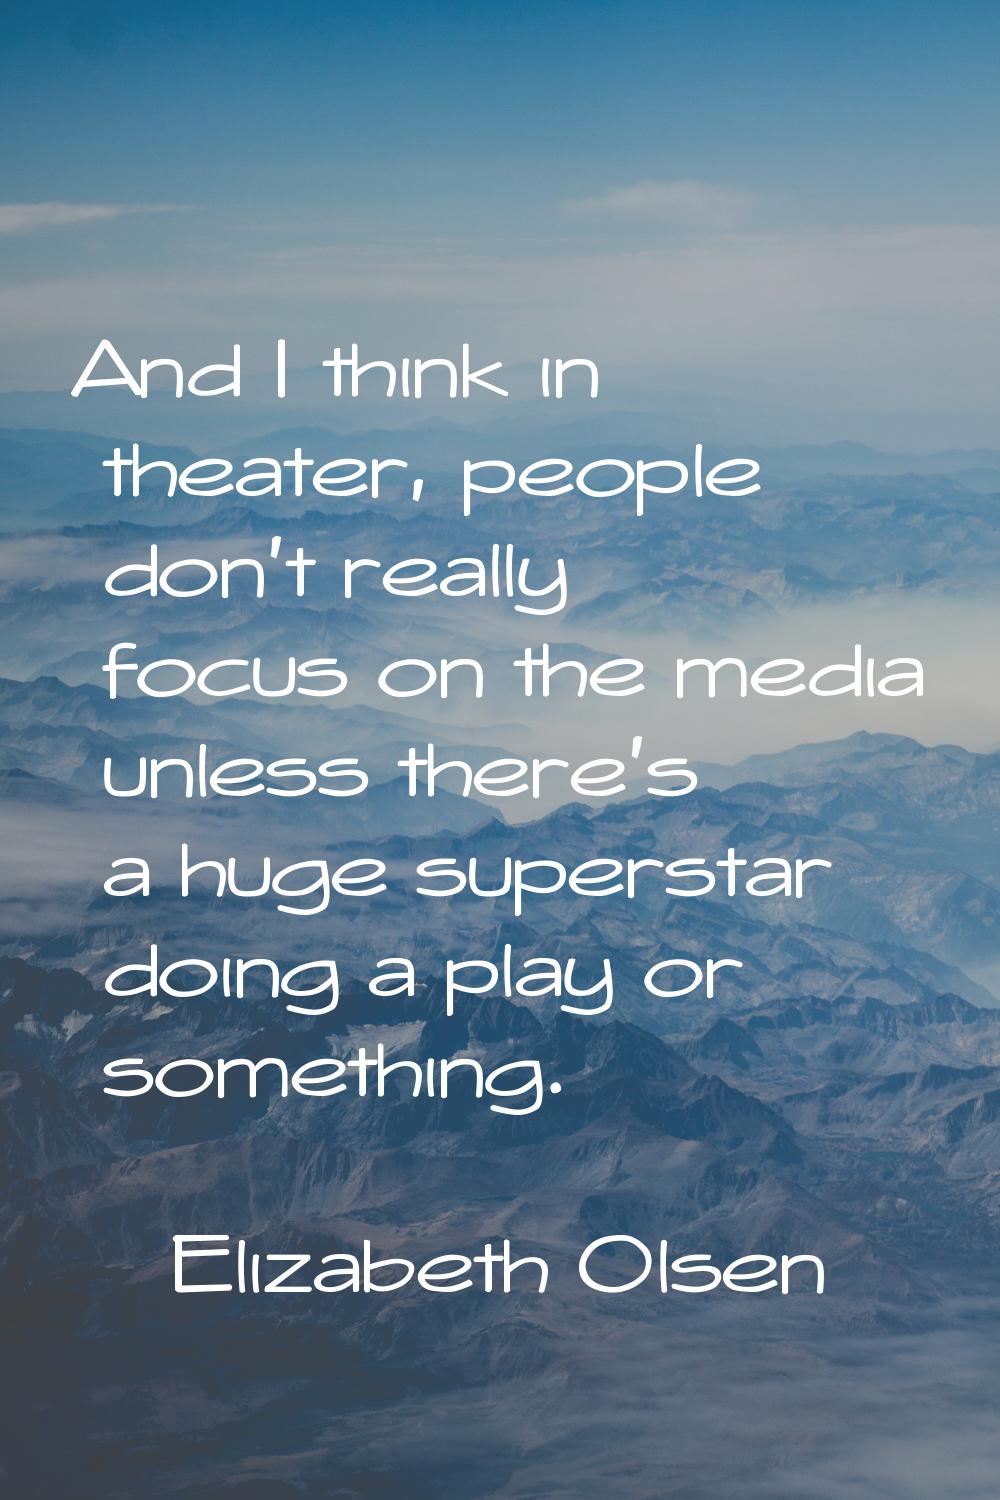 And I think in theater, people don't really focus on the media unless there's a huge superstar doin